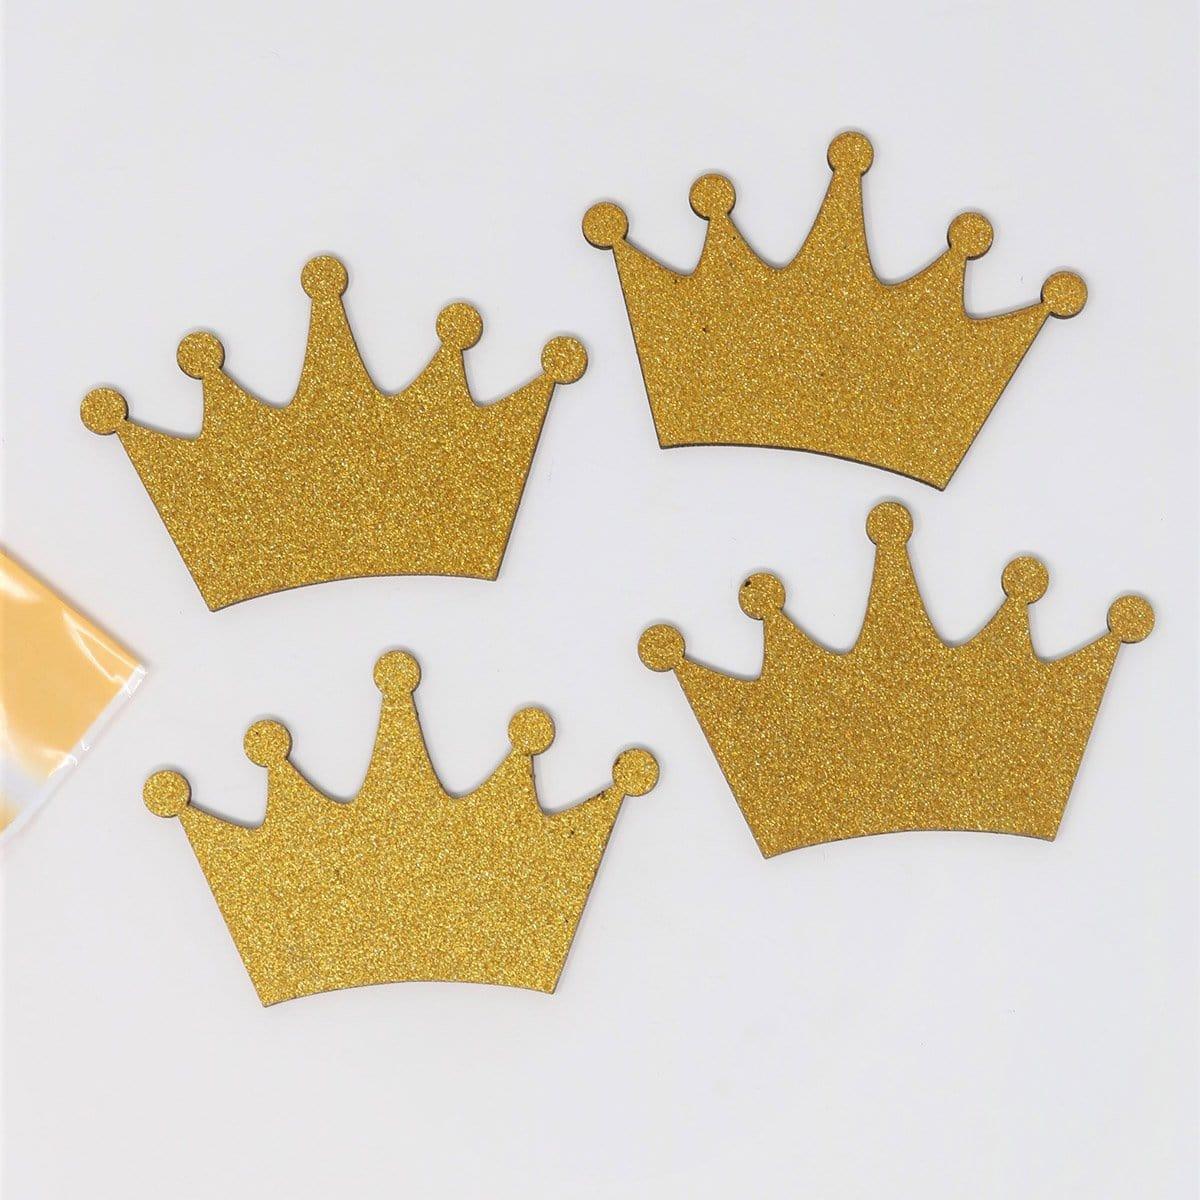 Buy Baby Shower Gold glitter crown embellishment, 4 per package sold at Party Expert